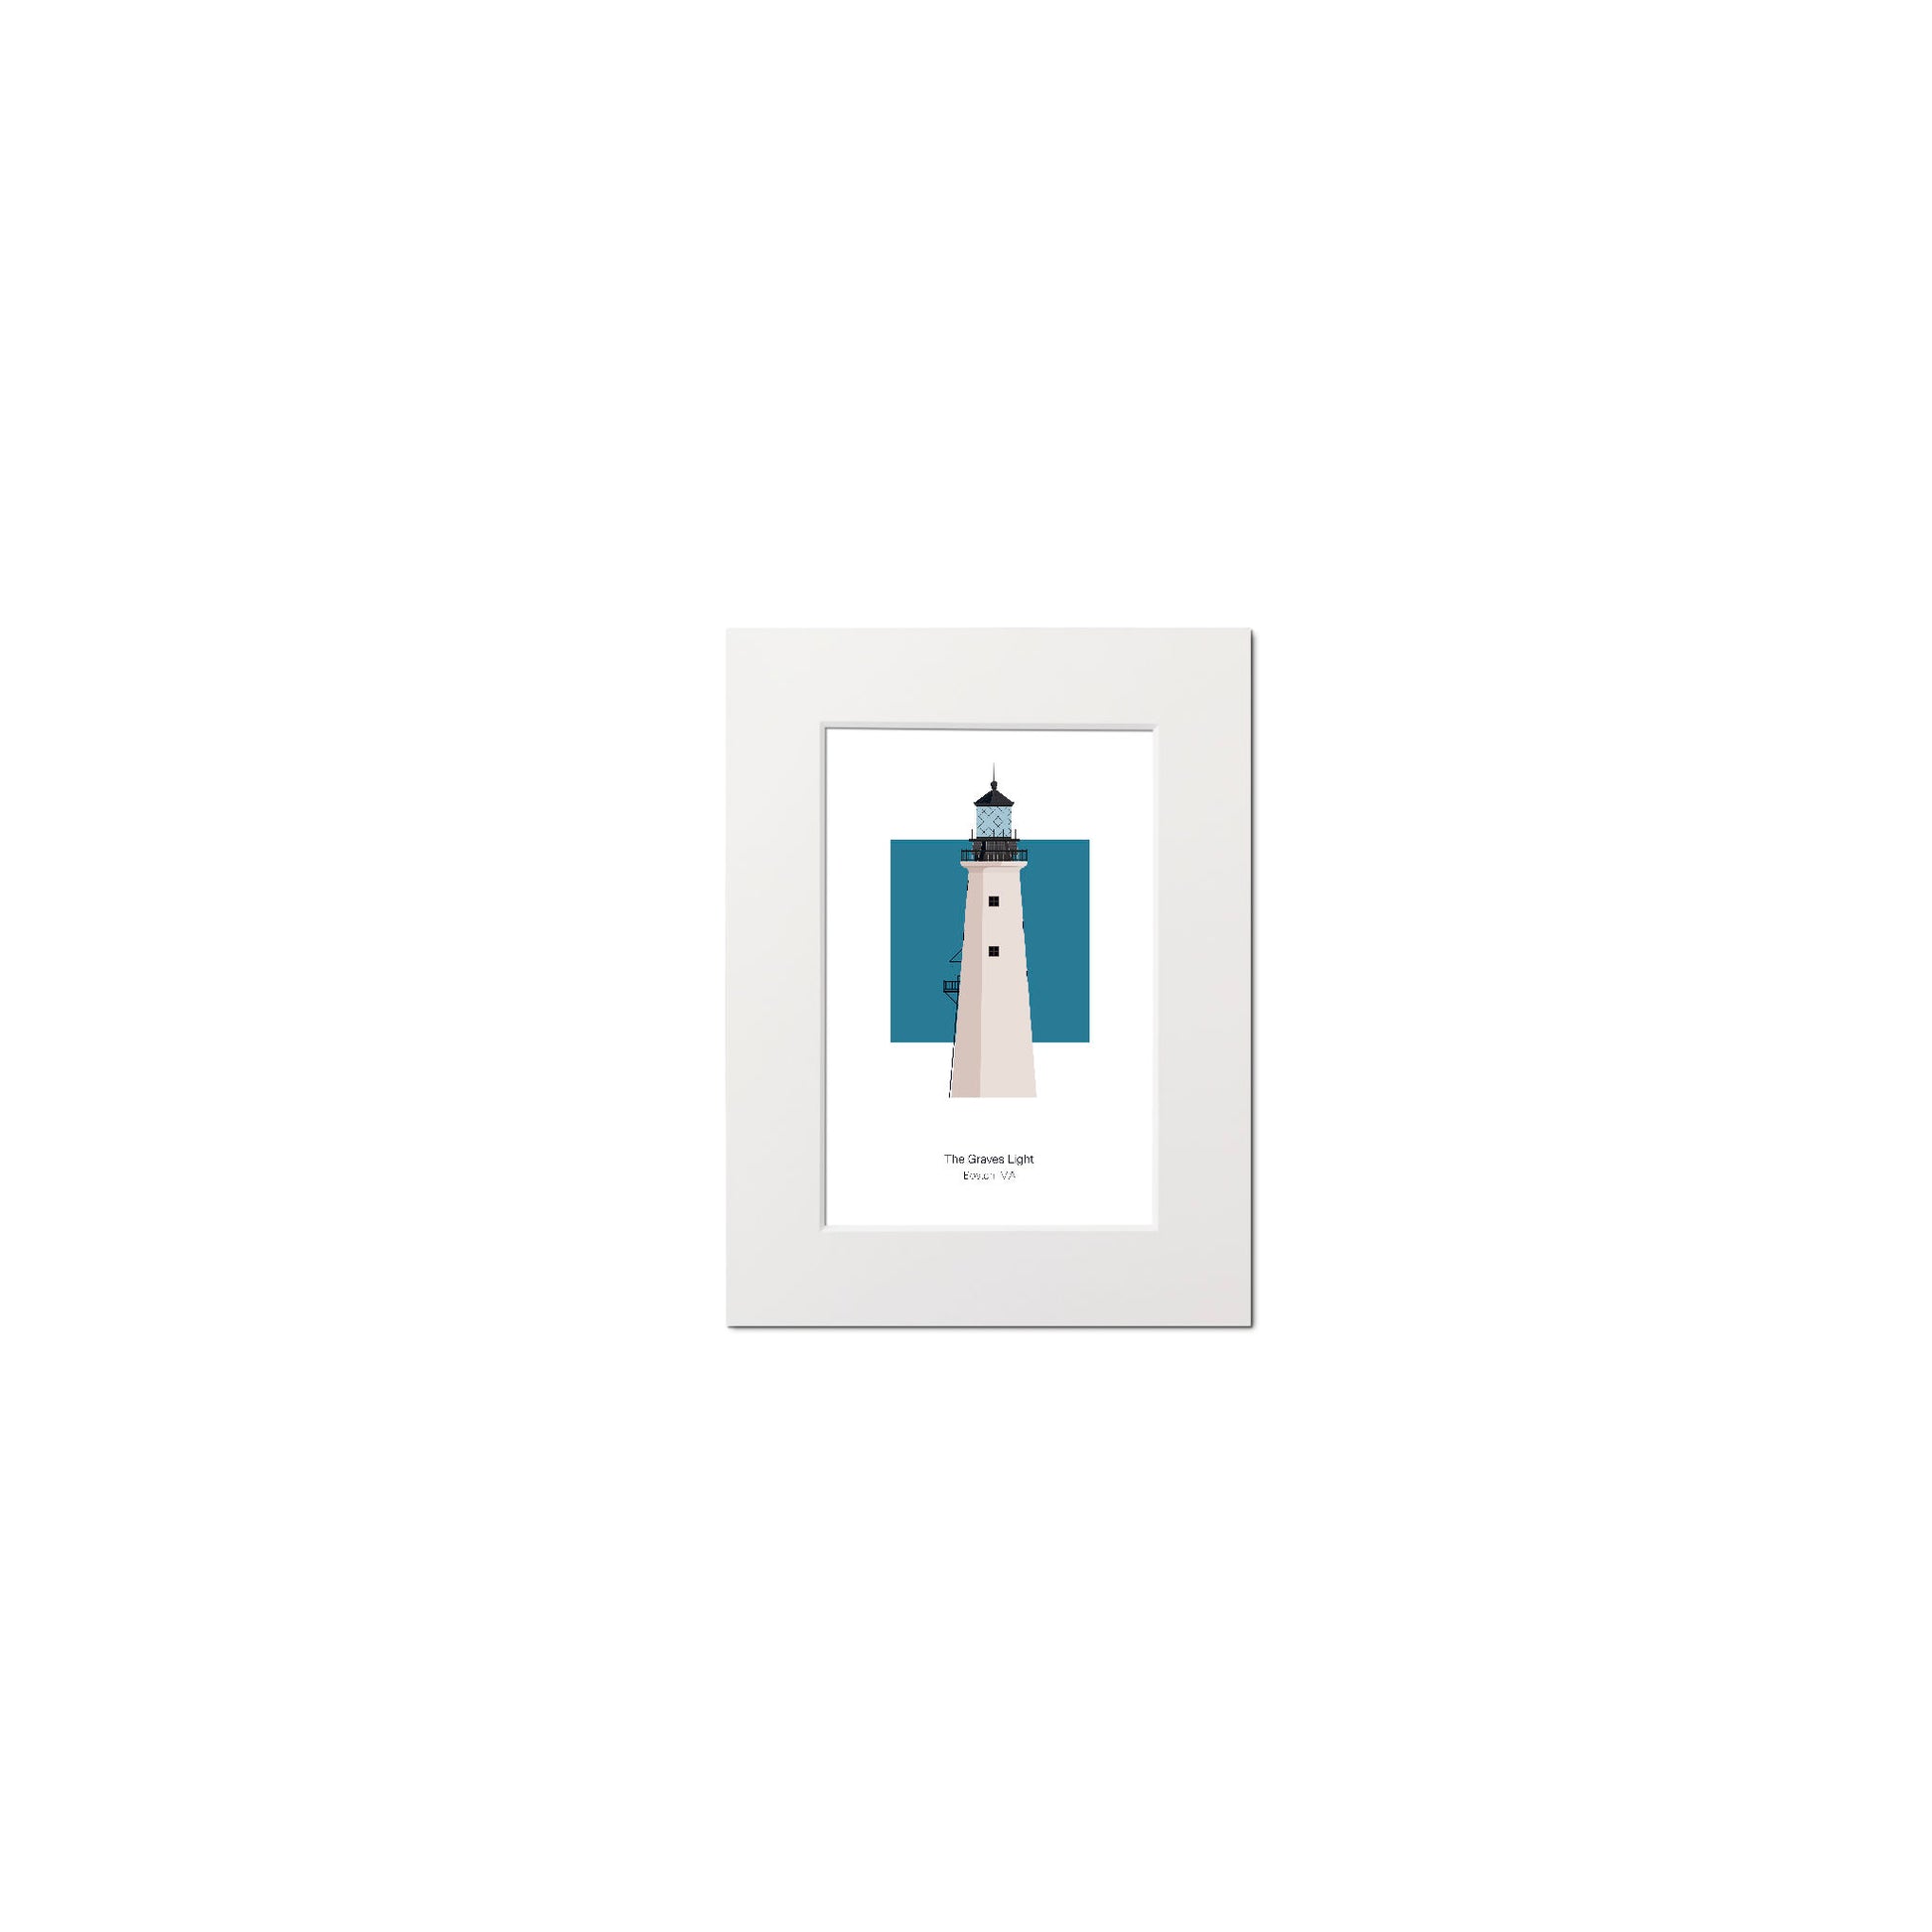 Illustration of the The Graves lighthouse, MA, USA. On a white background with aqua blue square as a backdrop., mounted and measuring 6"x8" (15x20cm).